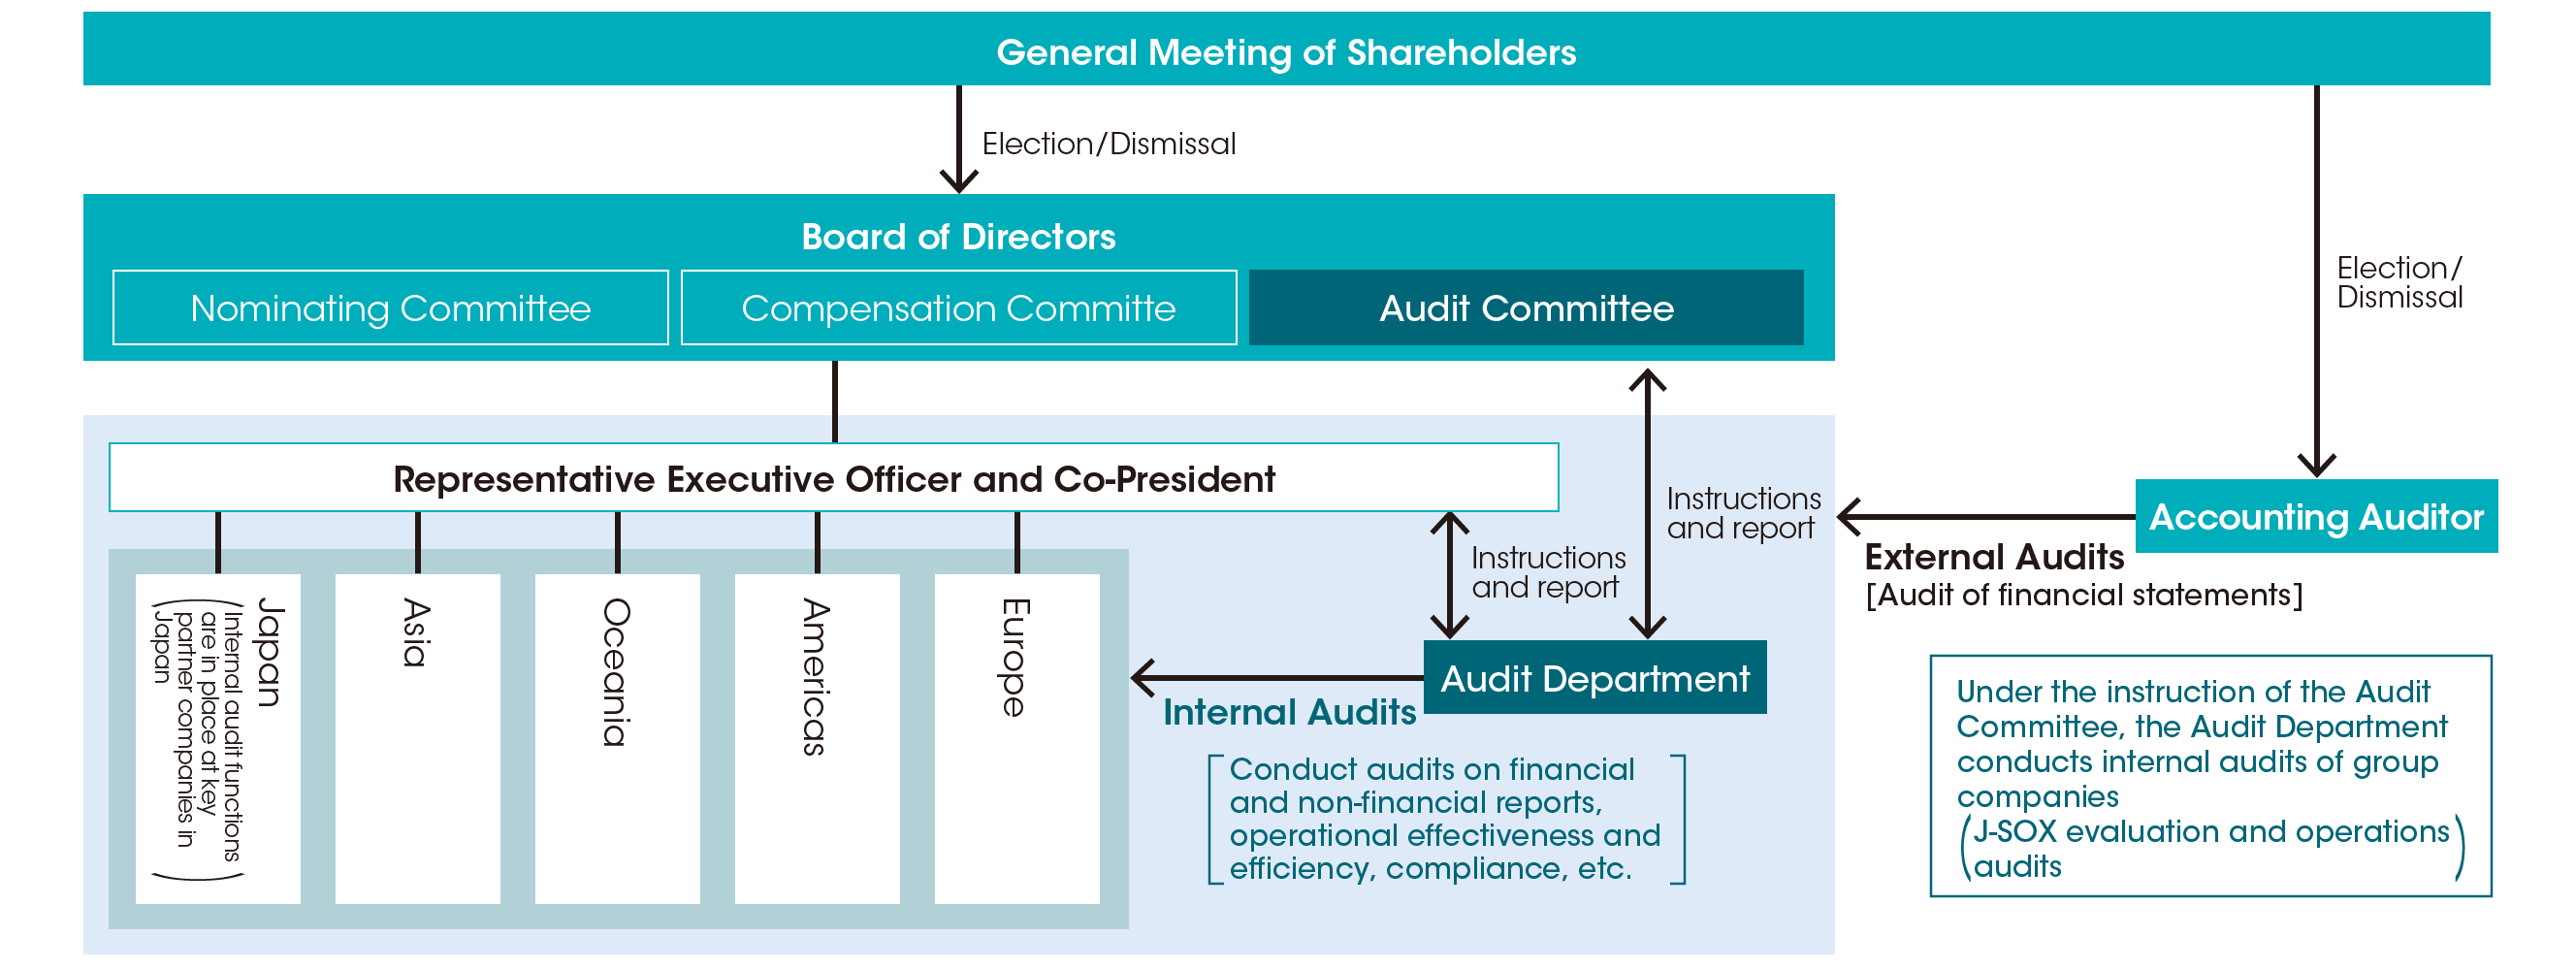 Global audit structure chart